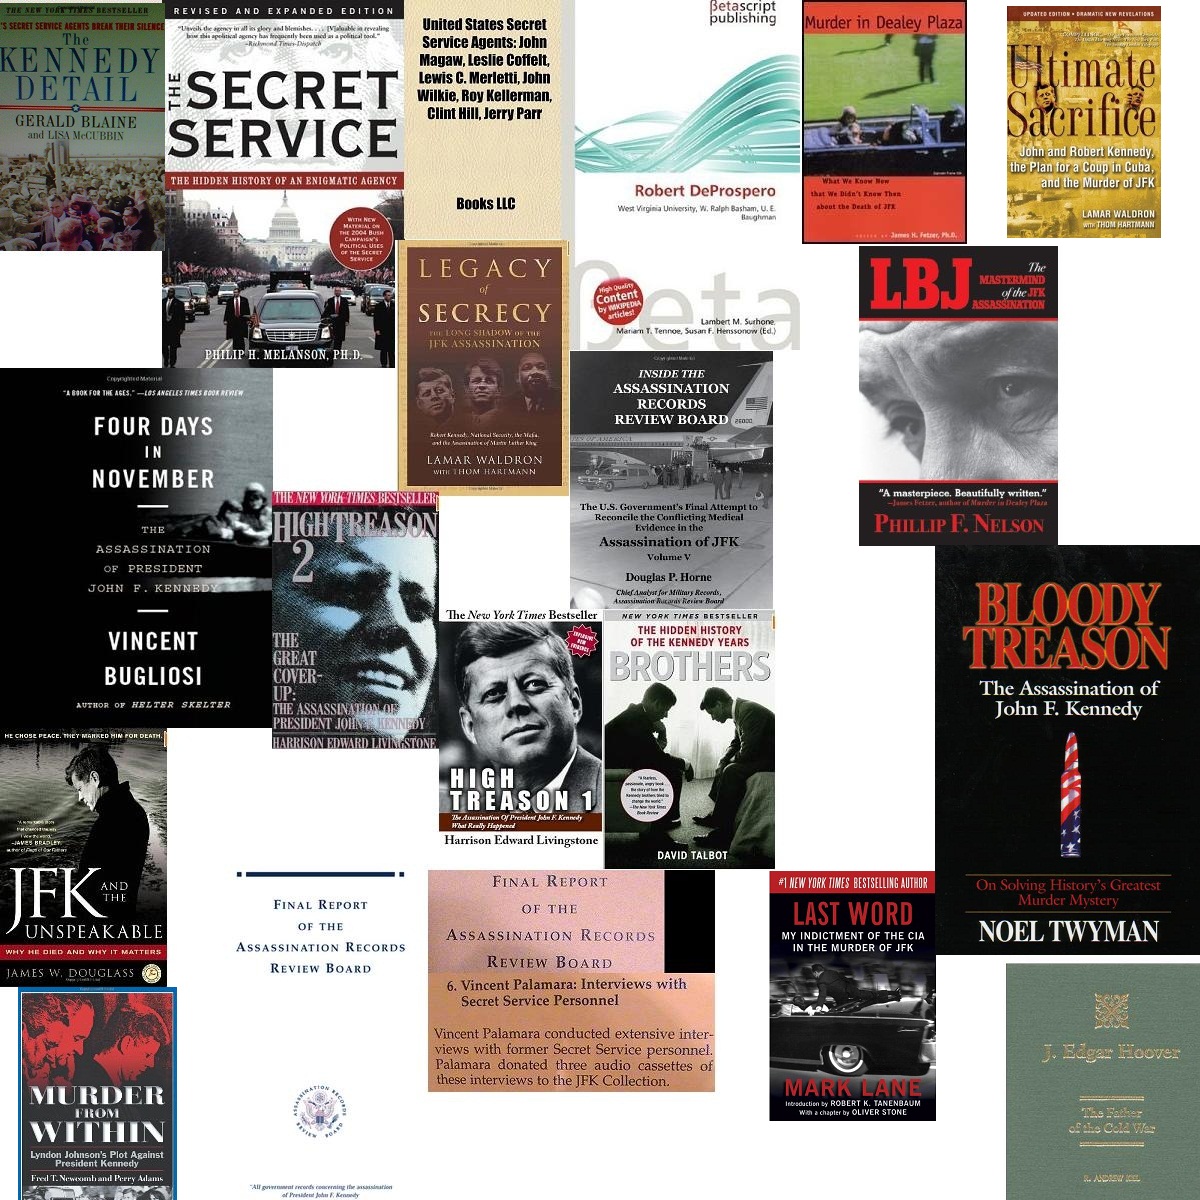 VINCE PALAMARA- JUST SOME OF THE MANY SECRET SERVICE/ JFK BOOKS I AM IN